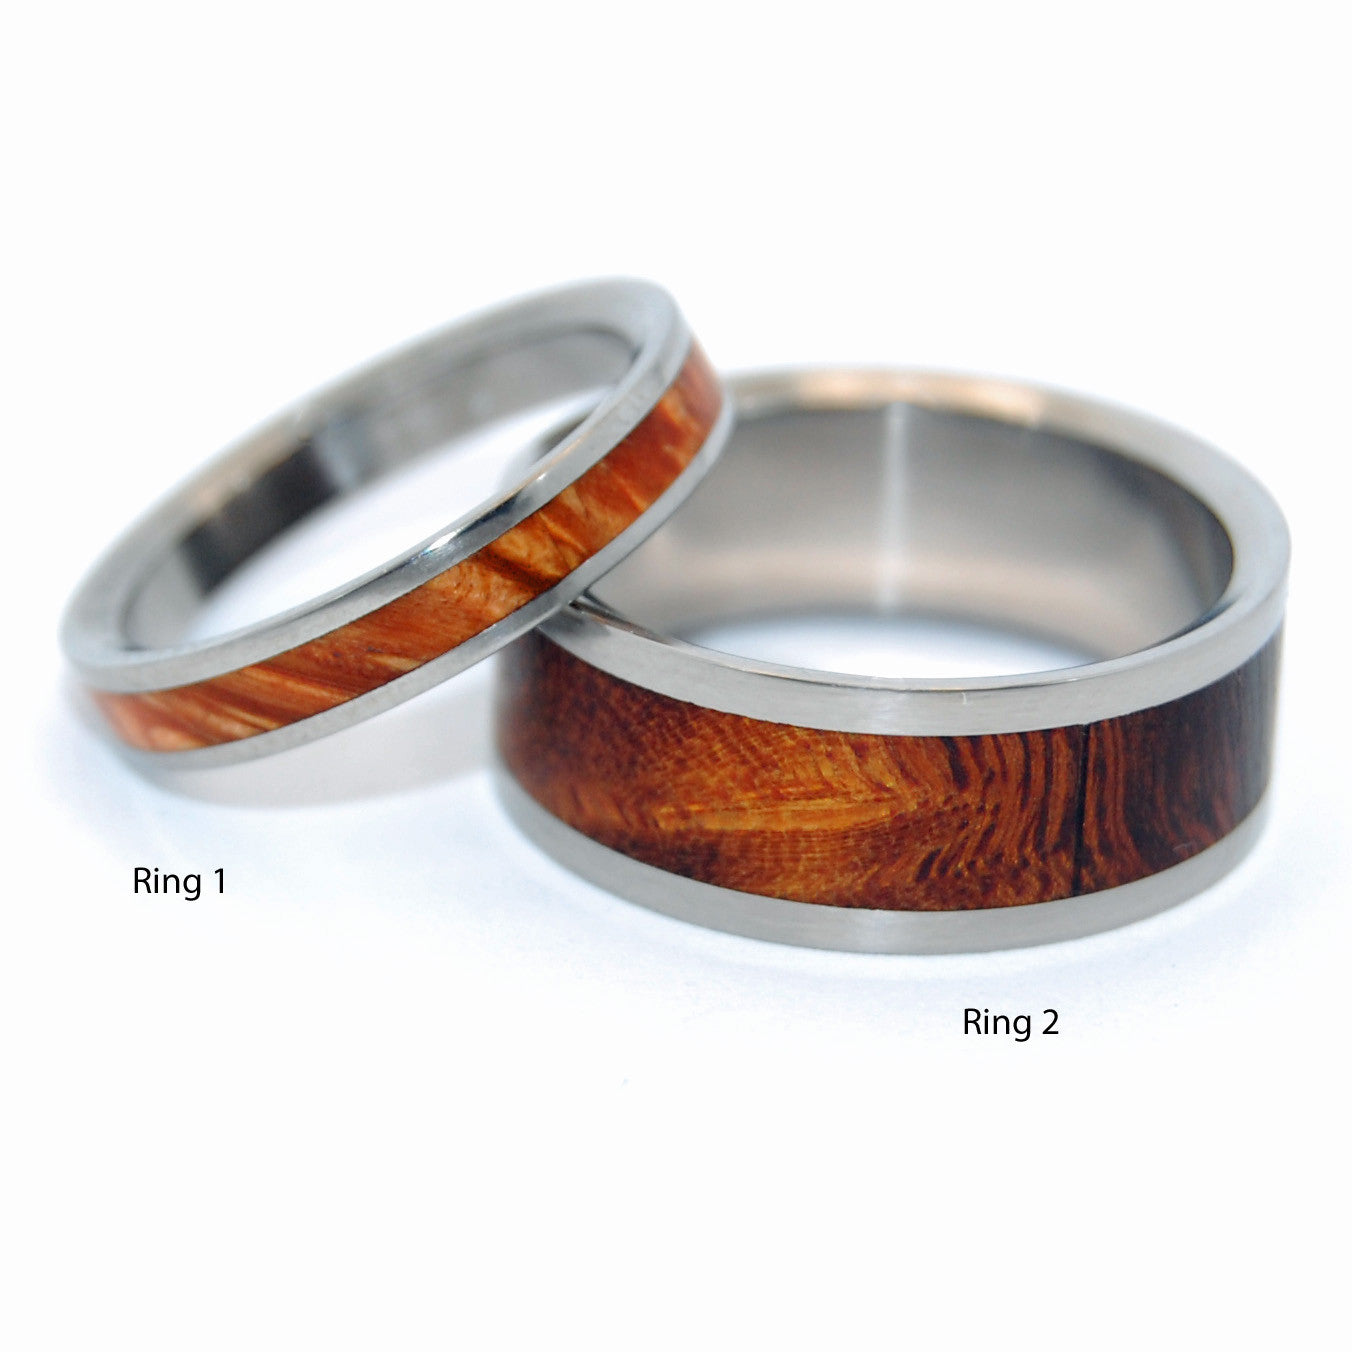 You at Sunrise and Desert Rose | Matching Wooden Wedding Ring Set - Minter and Richter Designs